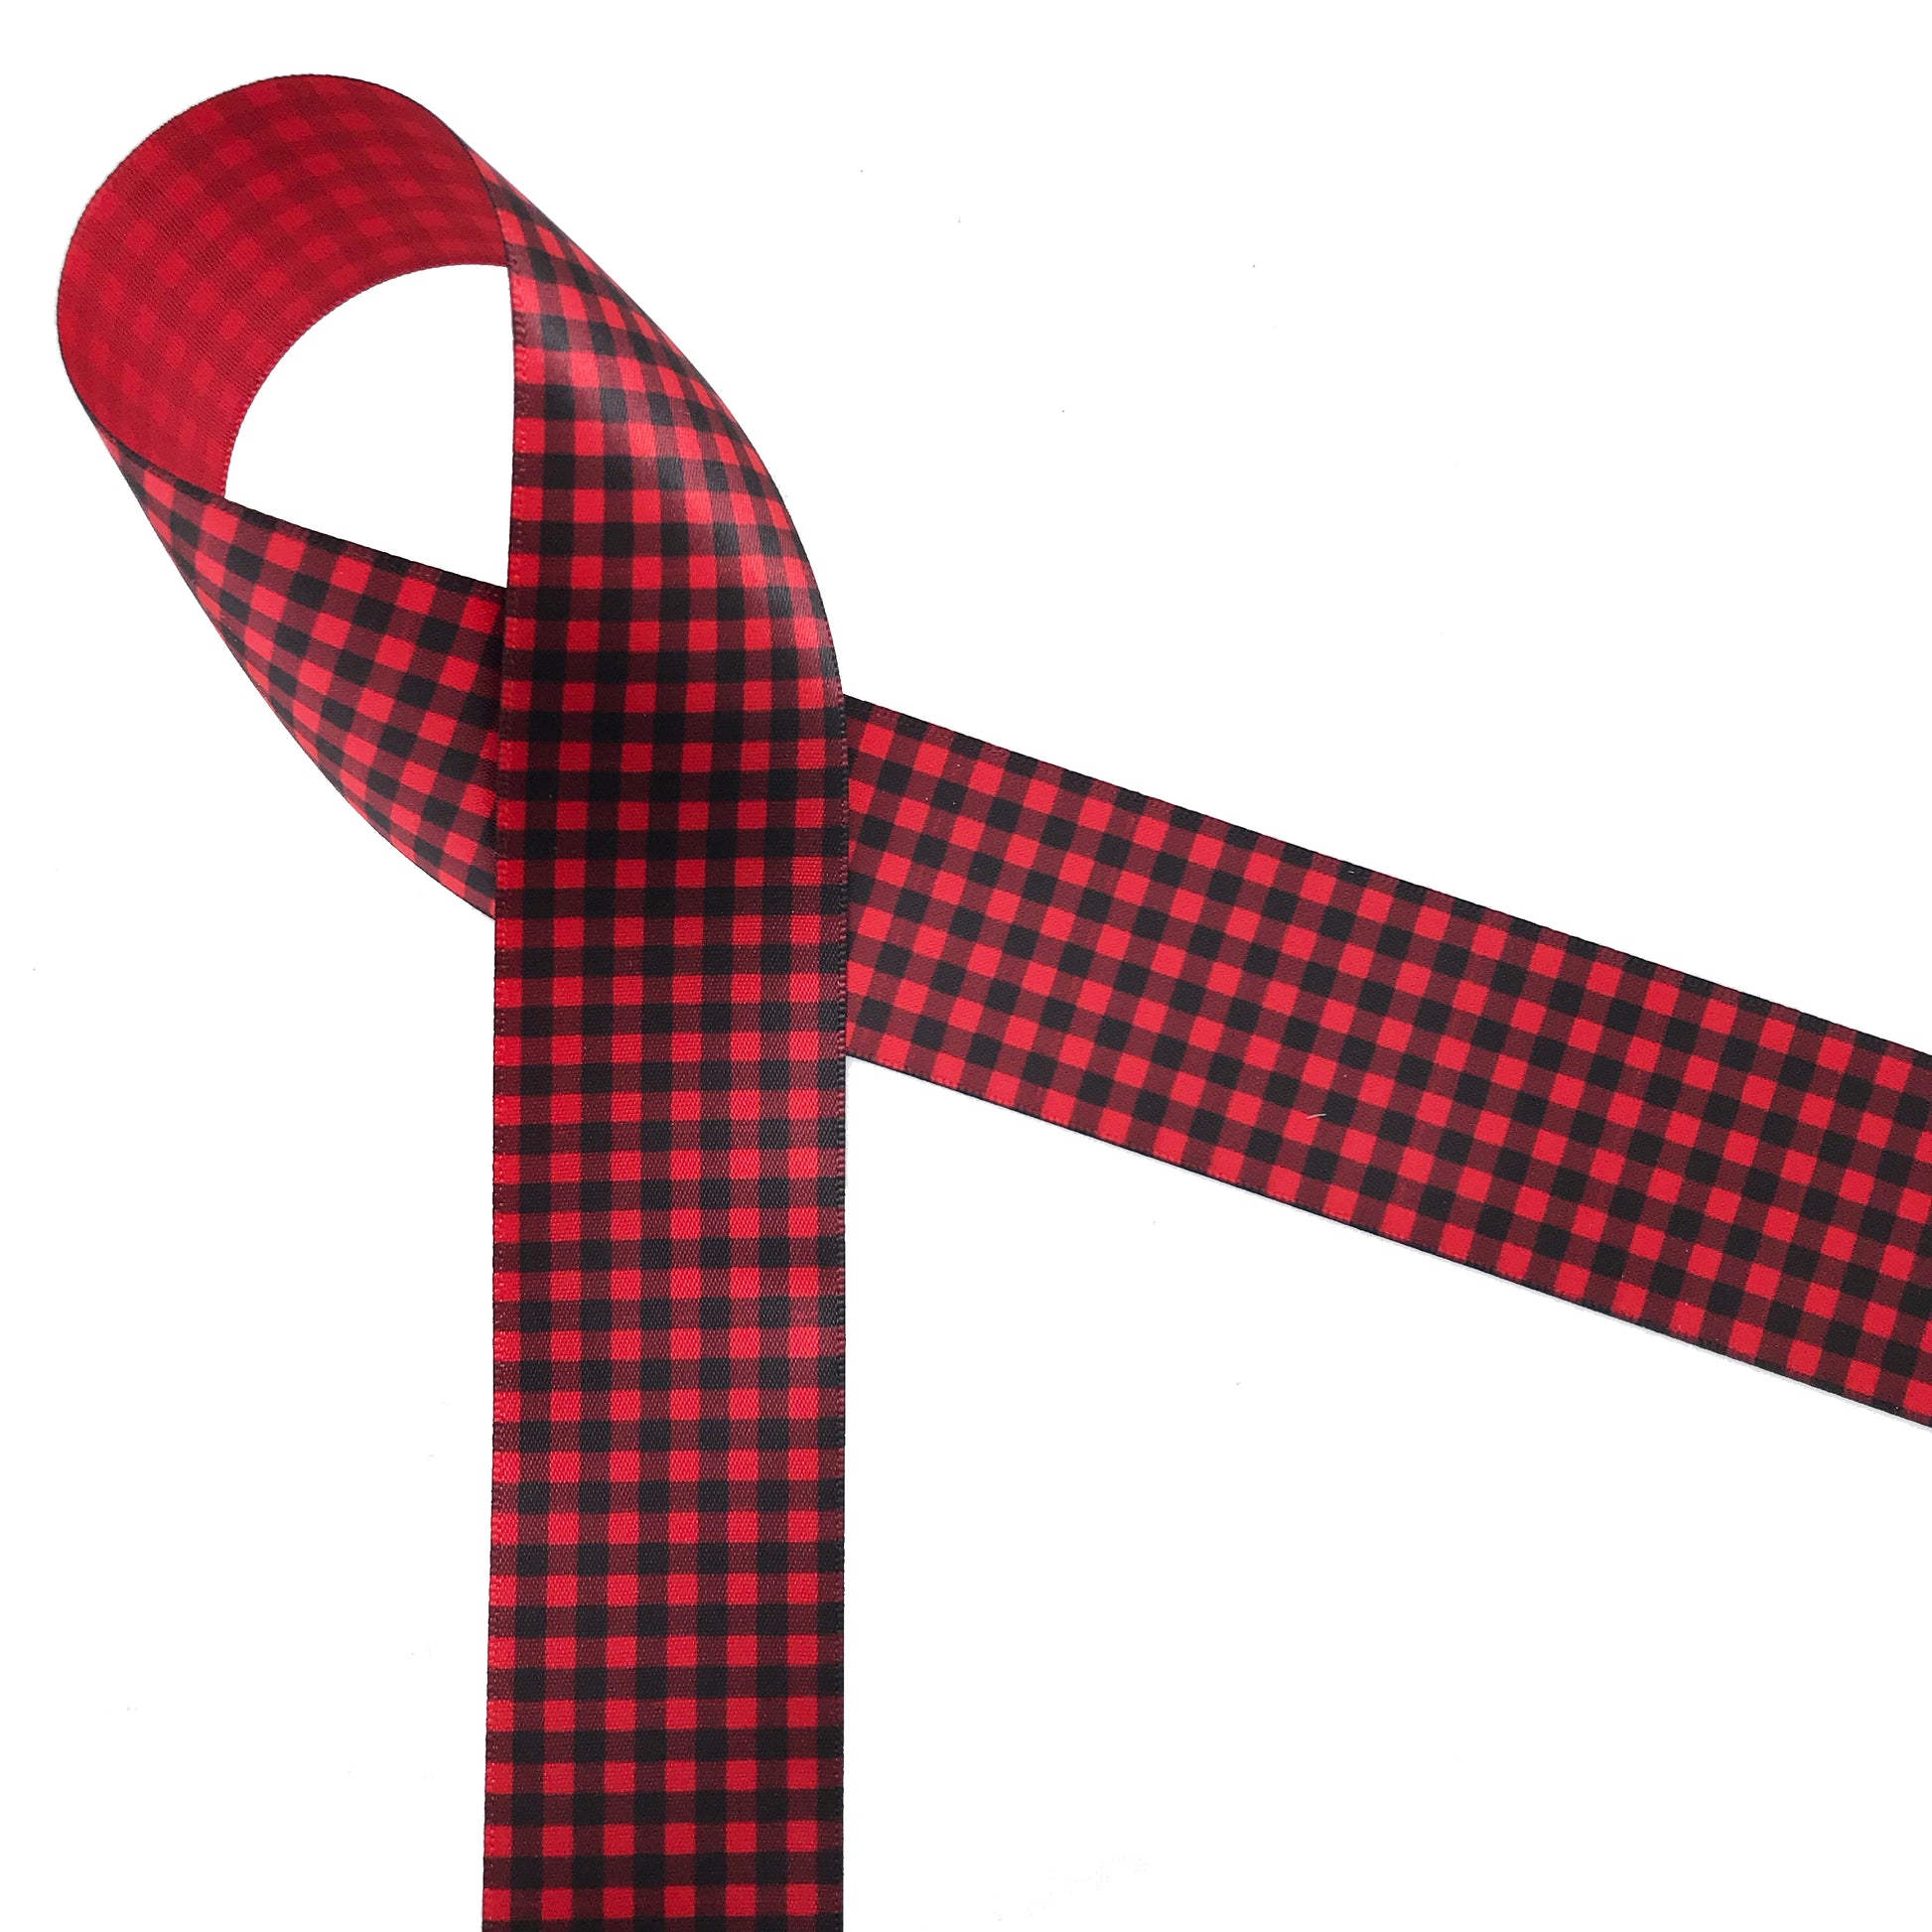 Red Grosgrain Ribbon 5 yards (You choose the width, 1/4, 3/8, 5/8, 7/8 or  1.5 inch)